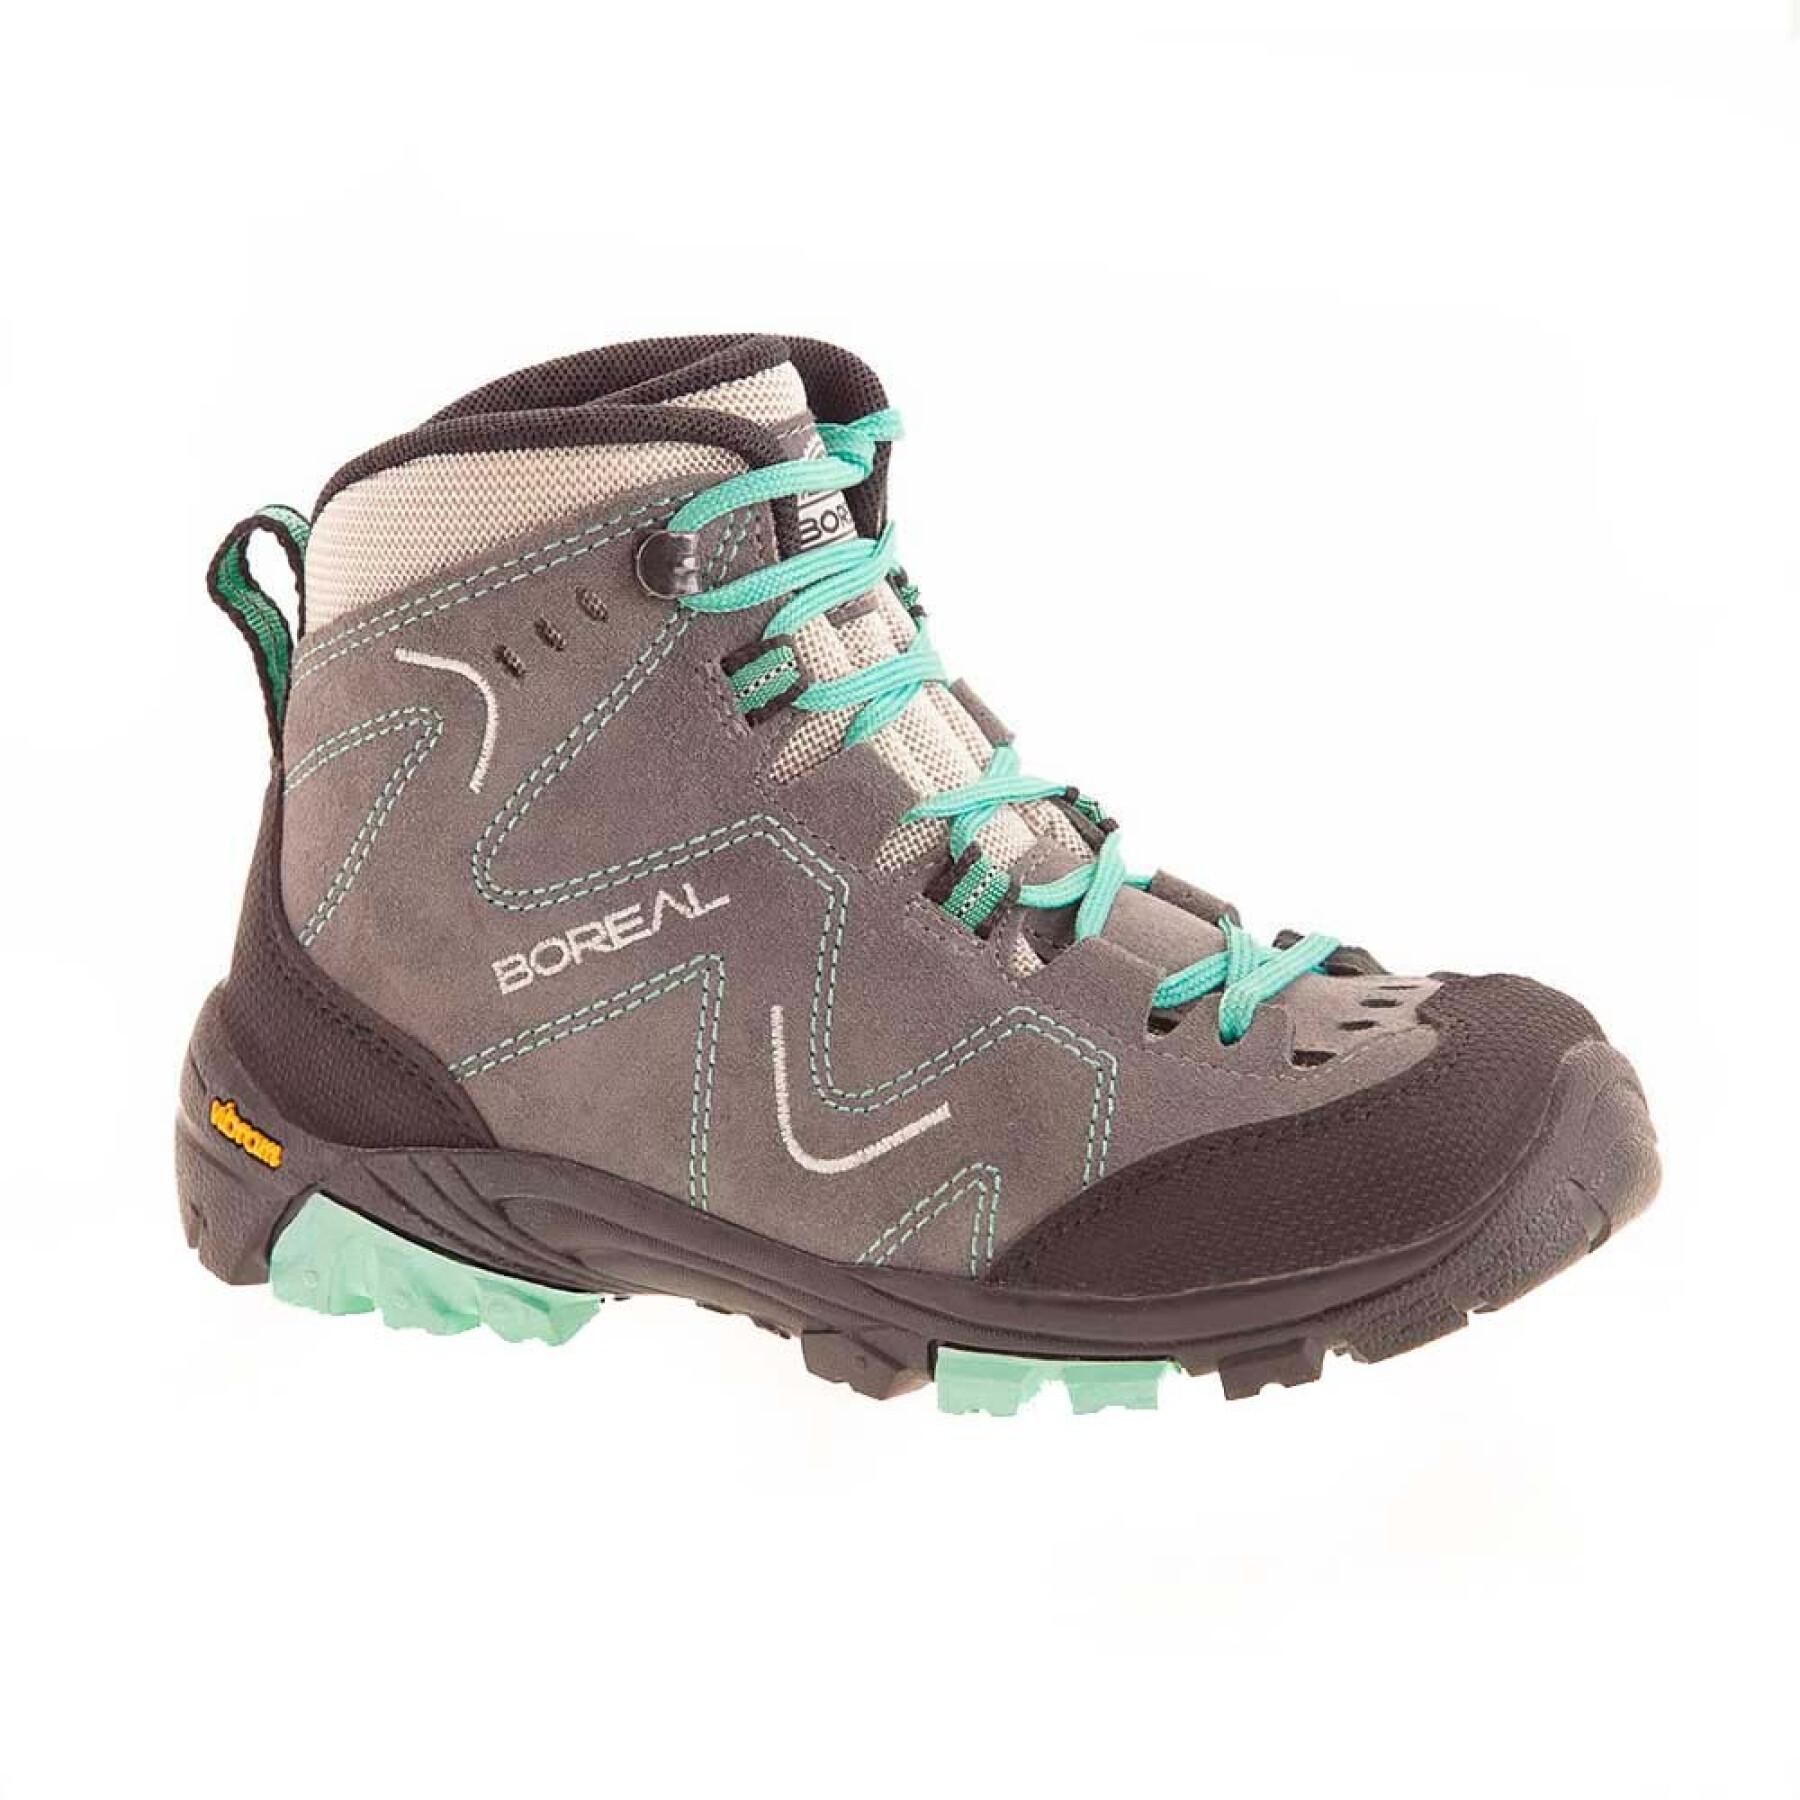 Hiking shoes for girls Boreal Aspen